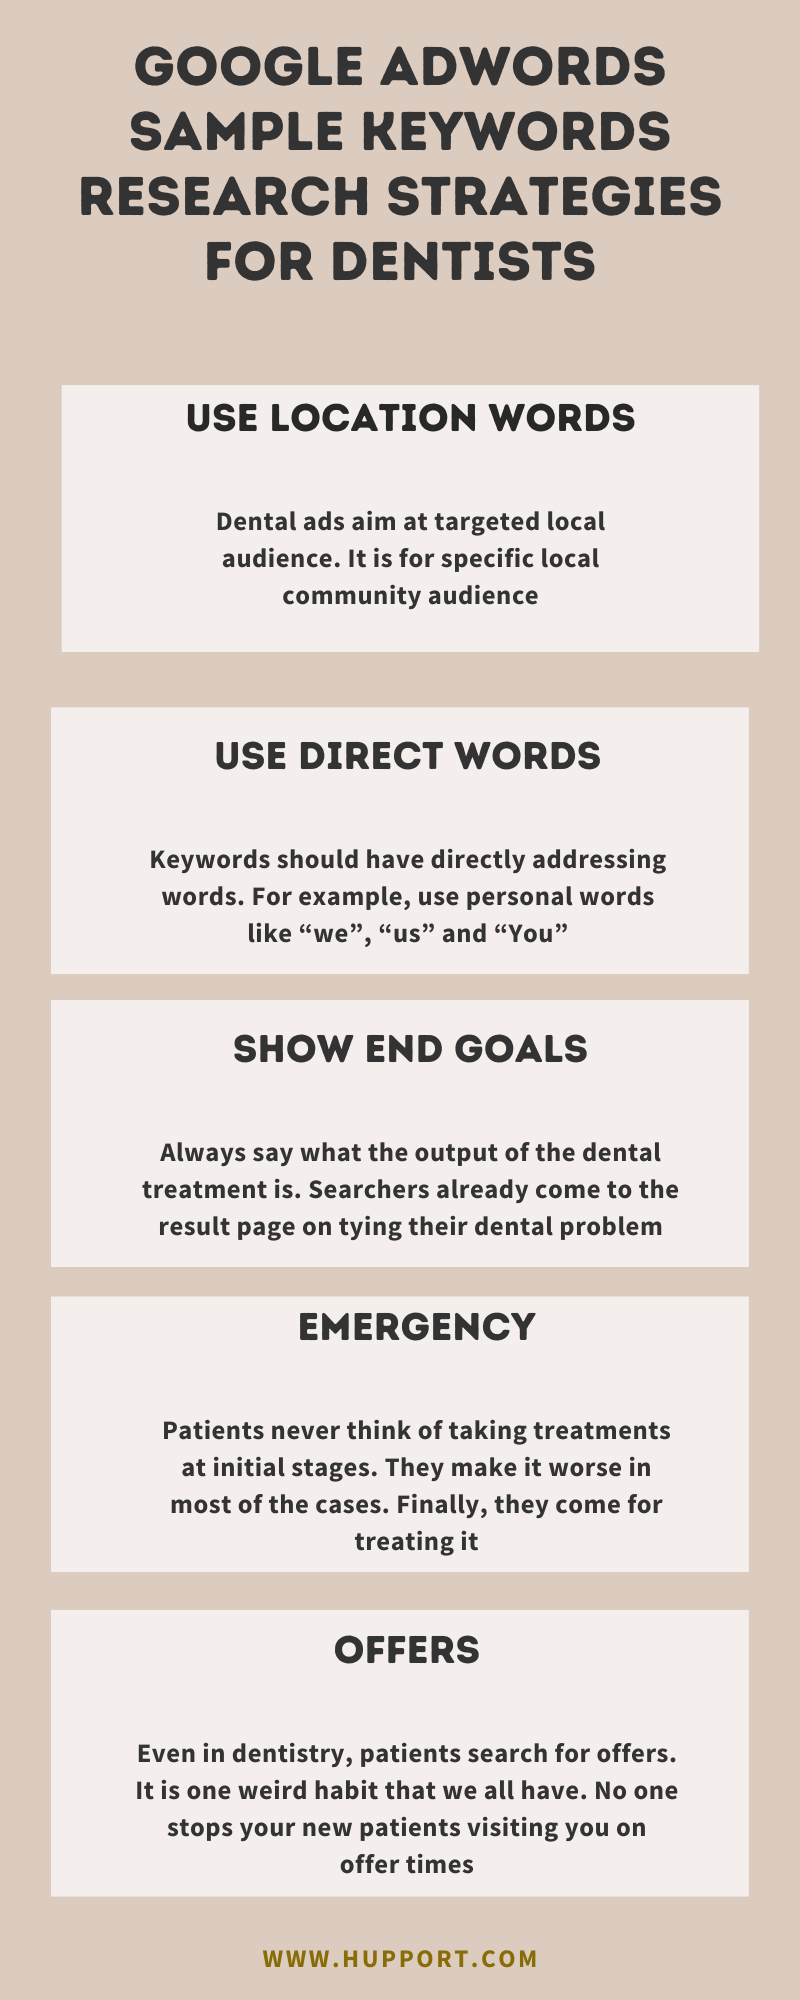 Google adwords sample keywords research strategies for dentists